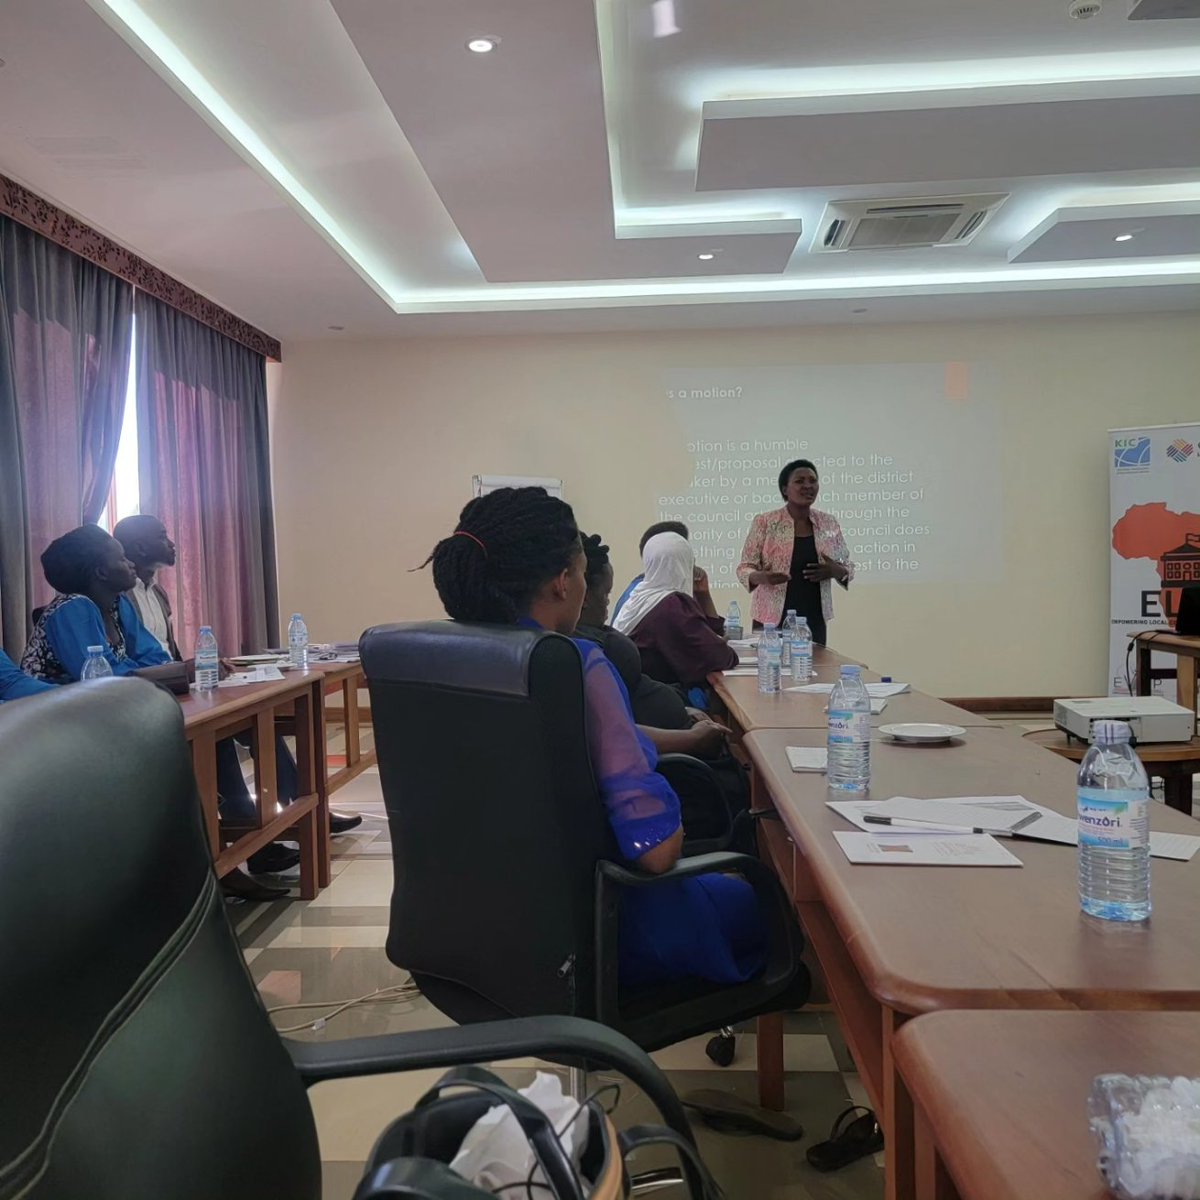 One of the major challenges councilors face is lack of knowledge of the rules of procedure. This contributes to conflicts in local councils in Uganda #Trainingcouncilors to influence policies for women & youth @WDNUganda & KIC training @wdn